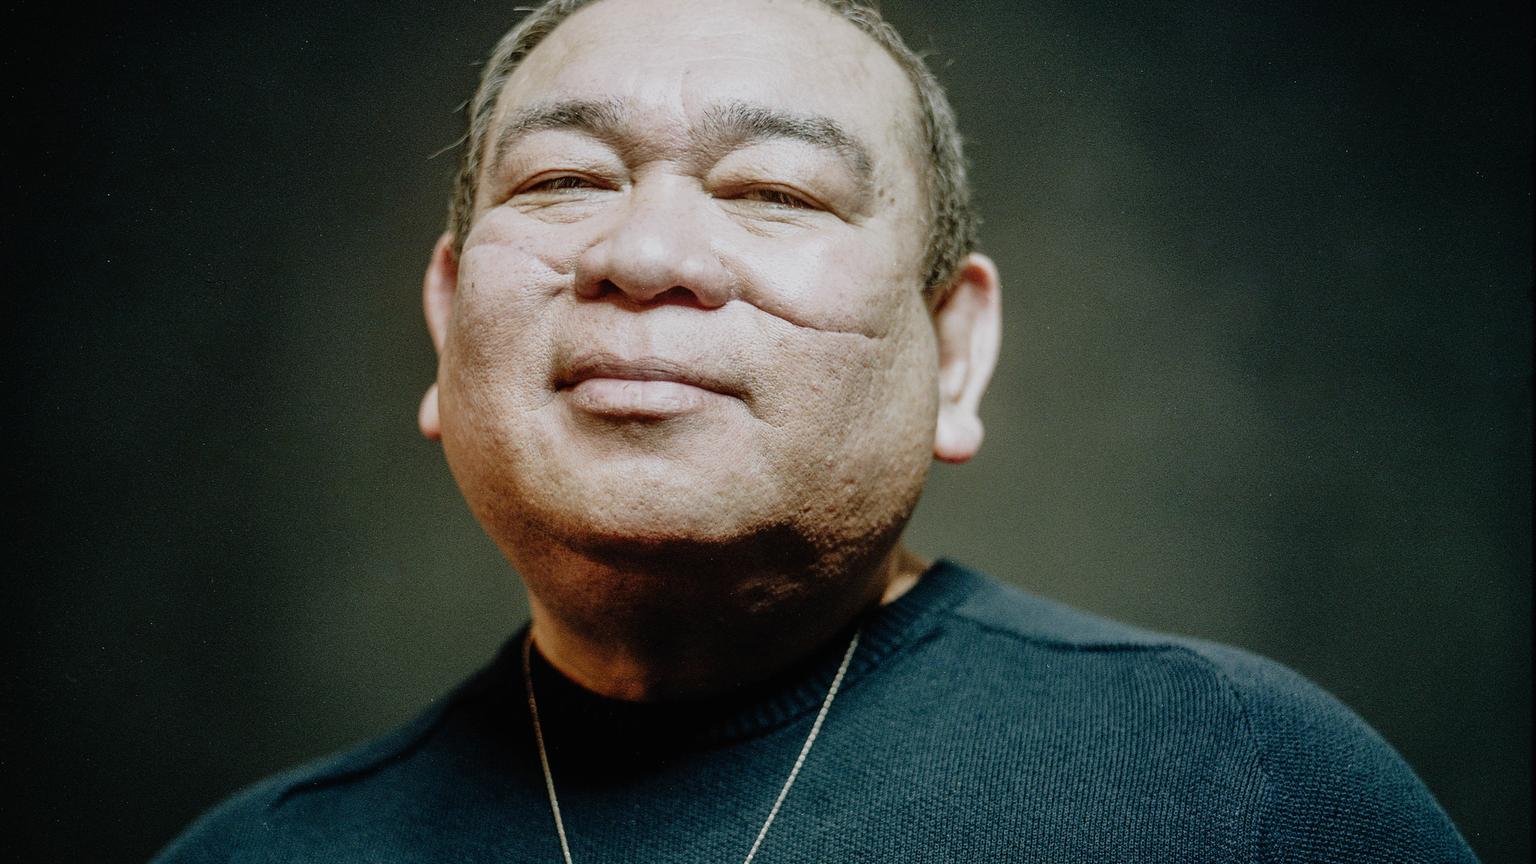 Film Photo Essay: The Face of Resilience - A Portrait of Noel Quintana